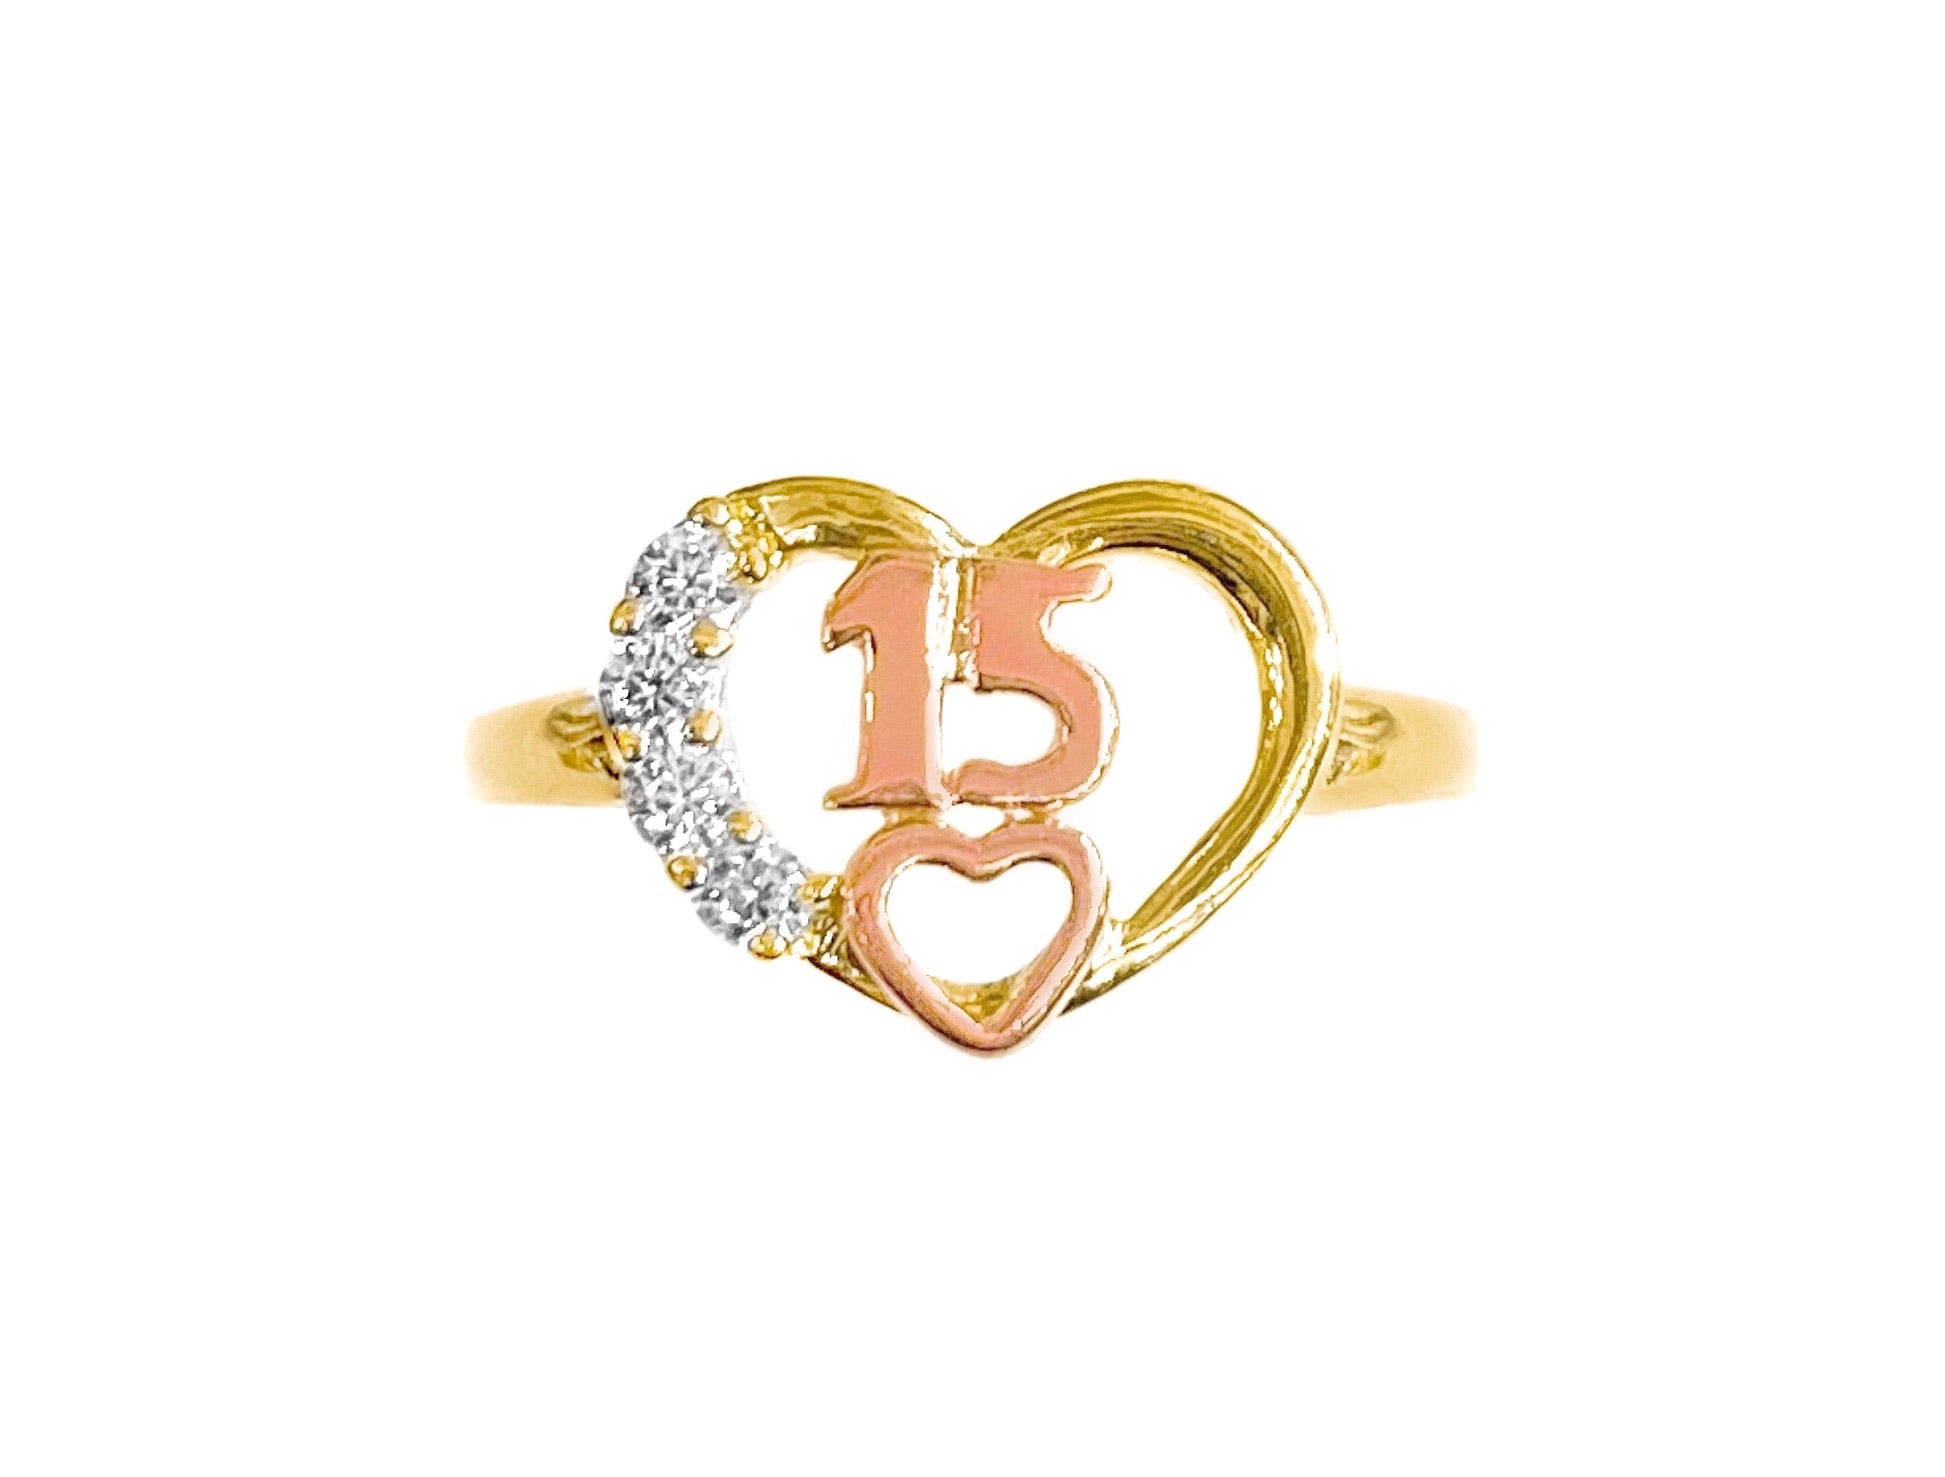 14K YELLOW GOLD DOUBLE HEART CZ 15 RING